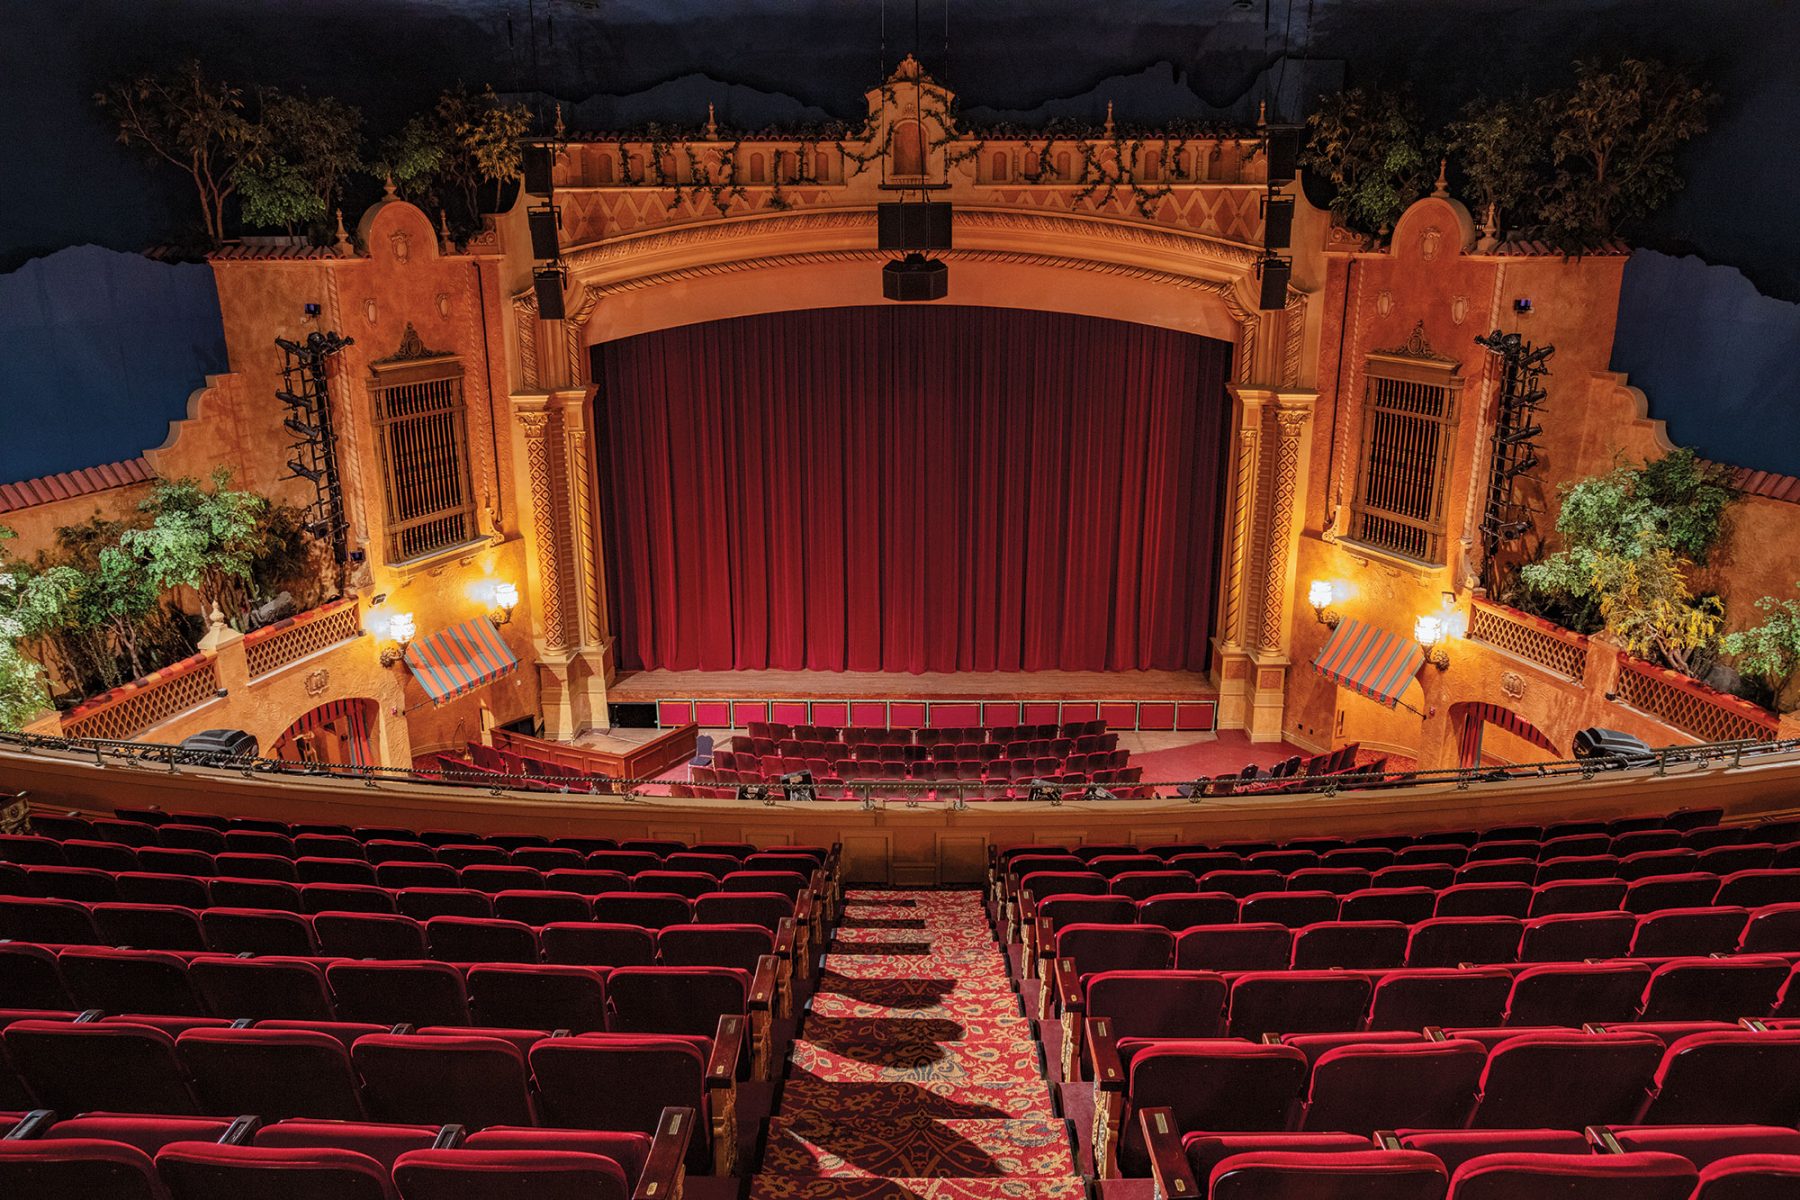 A view from above of an ornate, old-fashioned stage with golden lighting and a dark red curtain